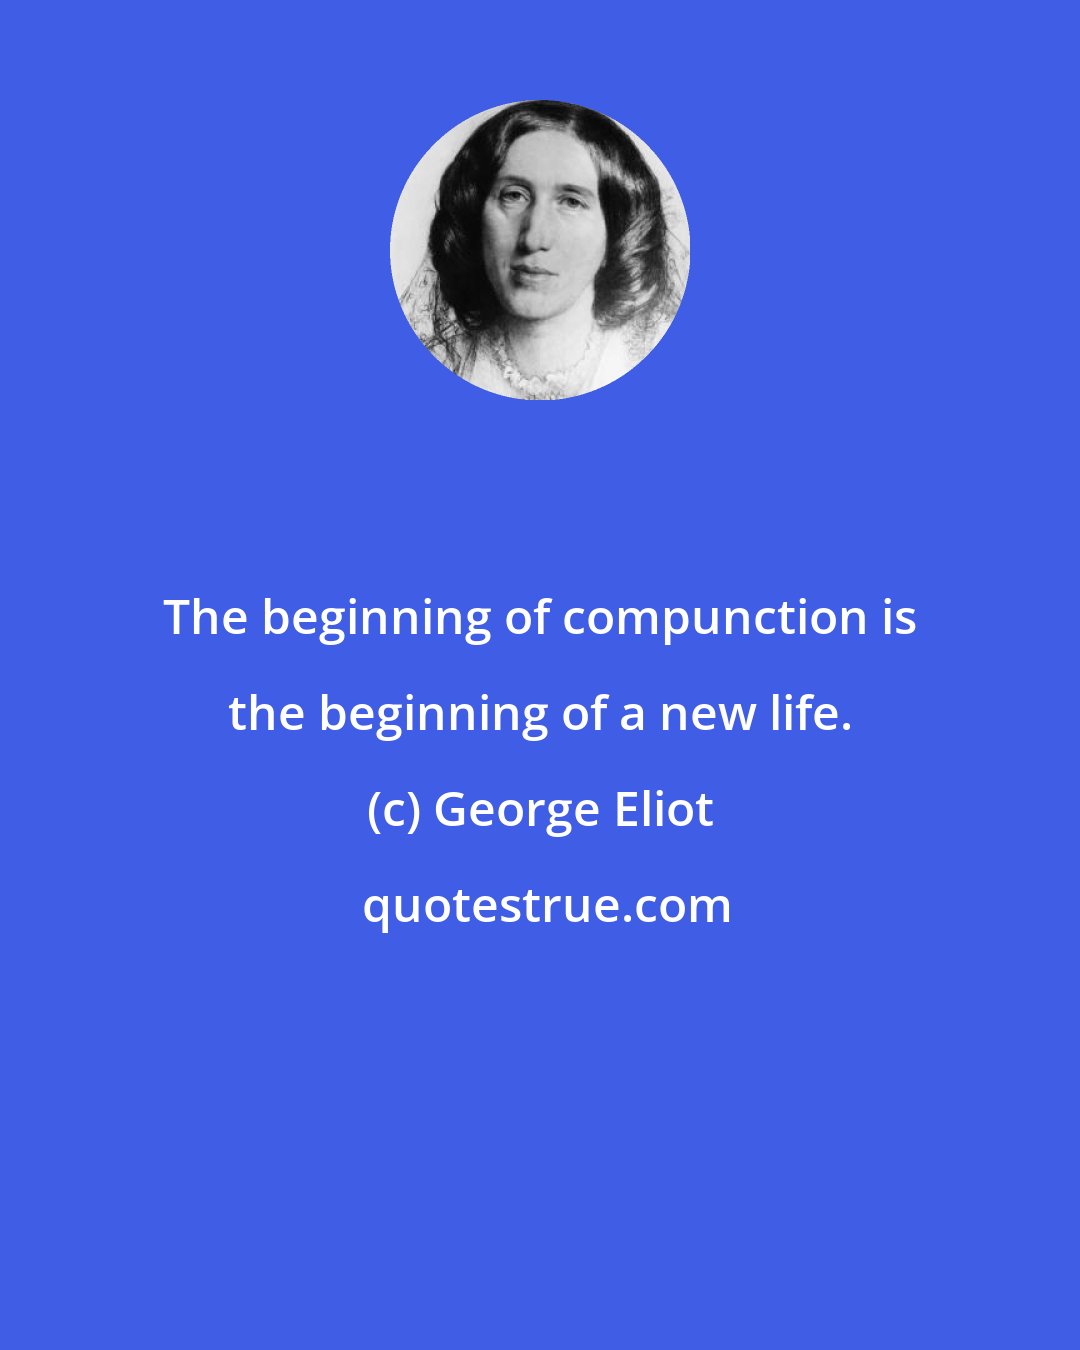 George Eliot: The beginning of compunction is the beginning of a new life.